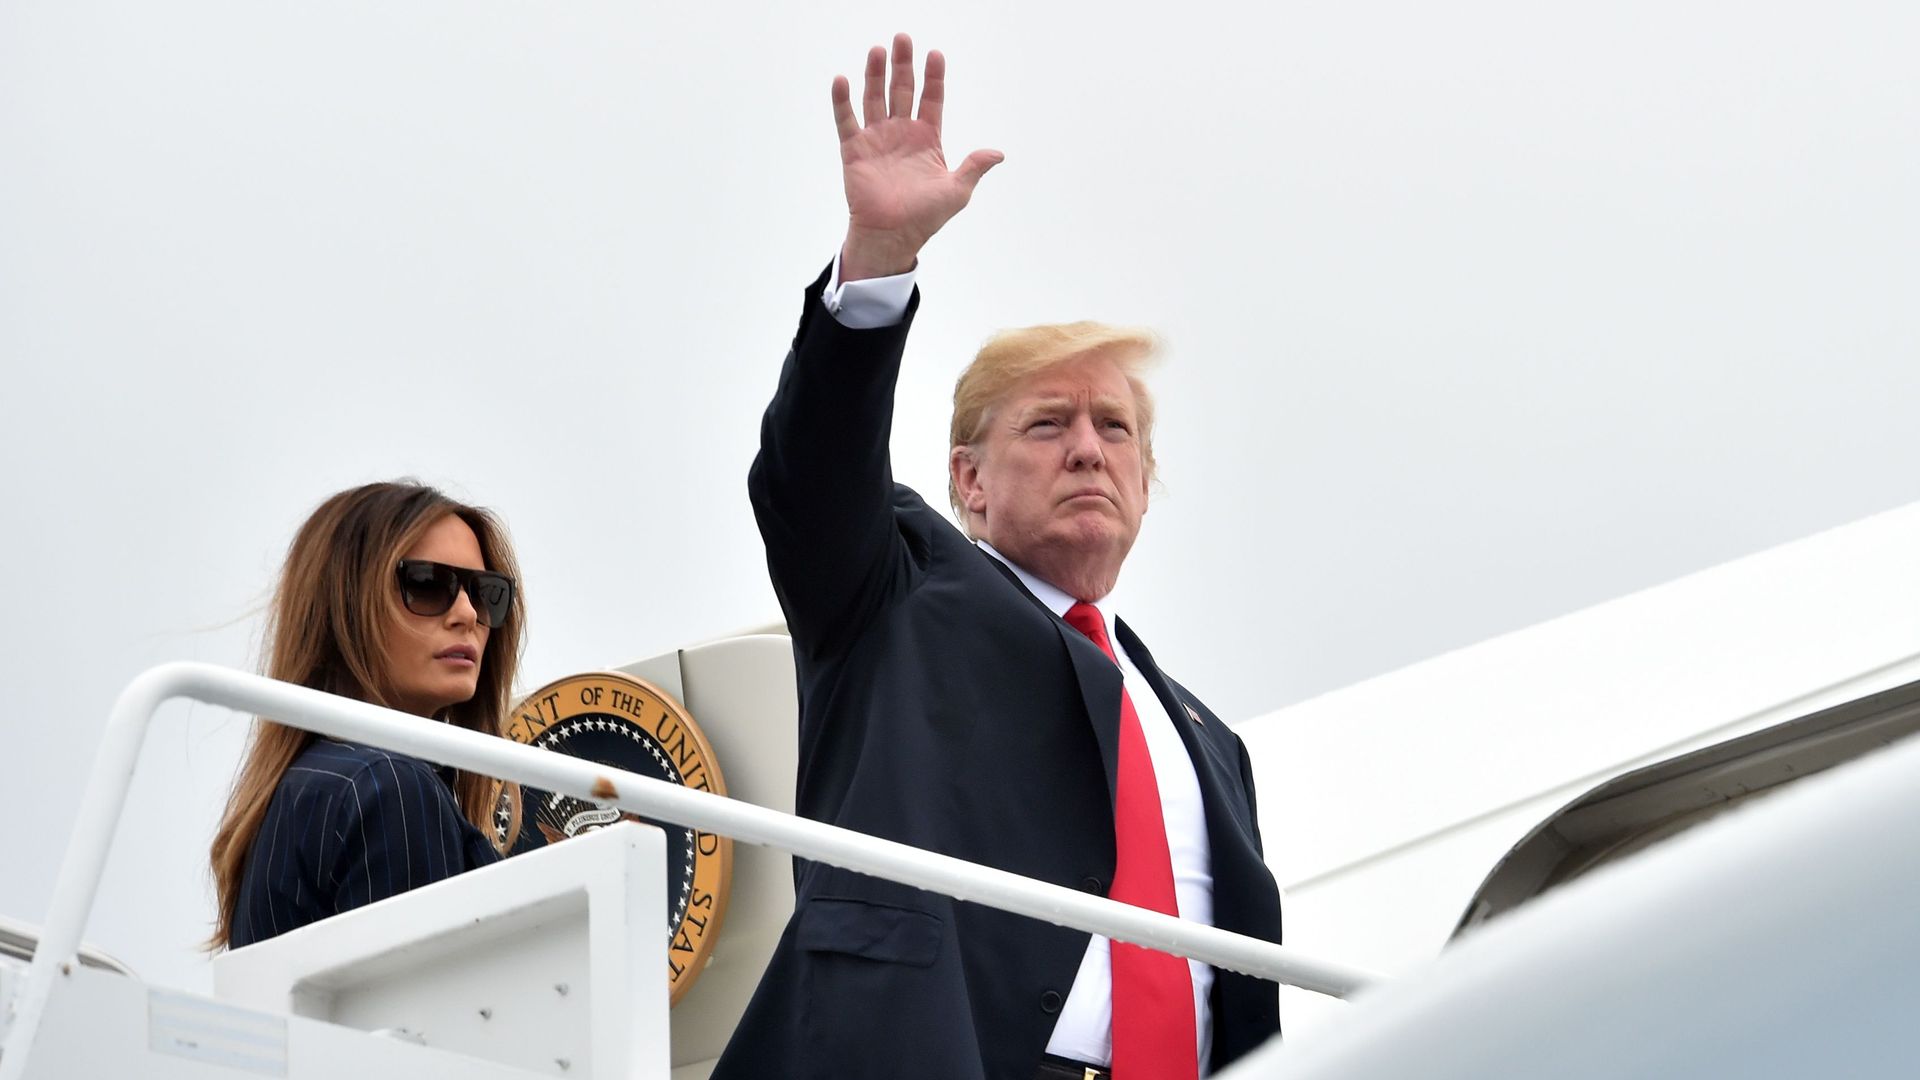 President Trump waves from Air Force One as he boards with Melania. 